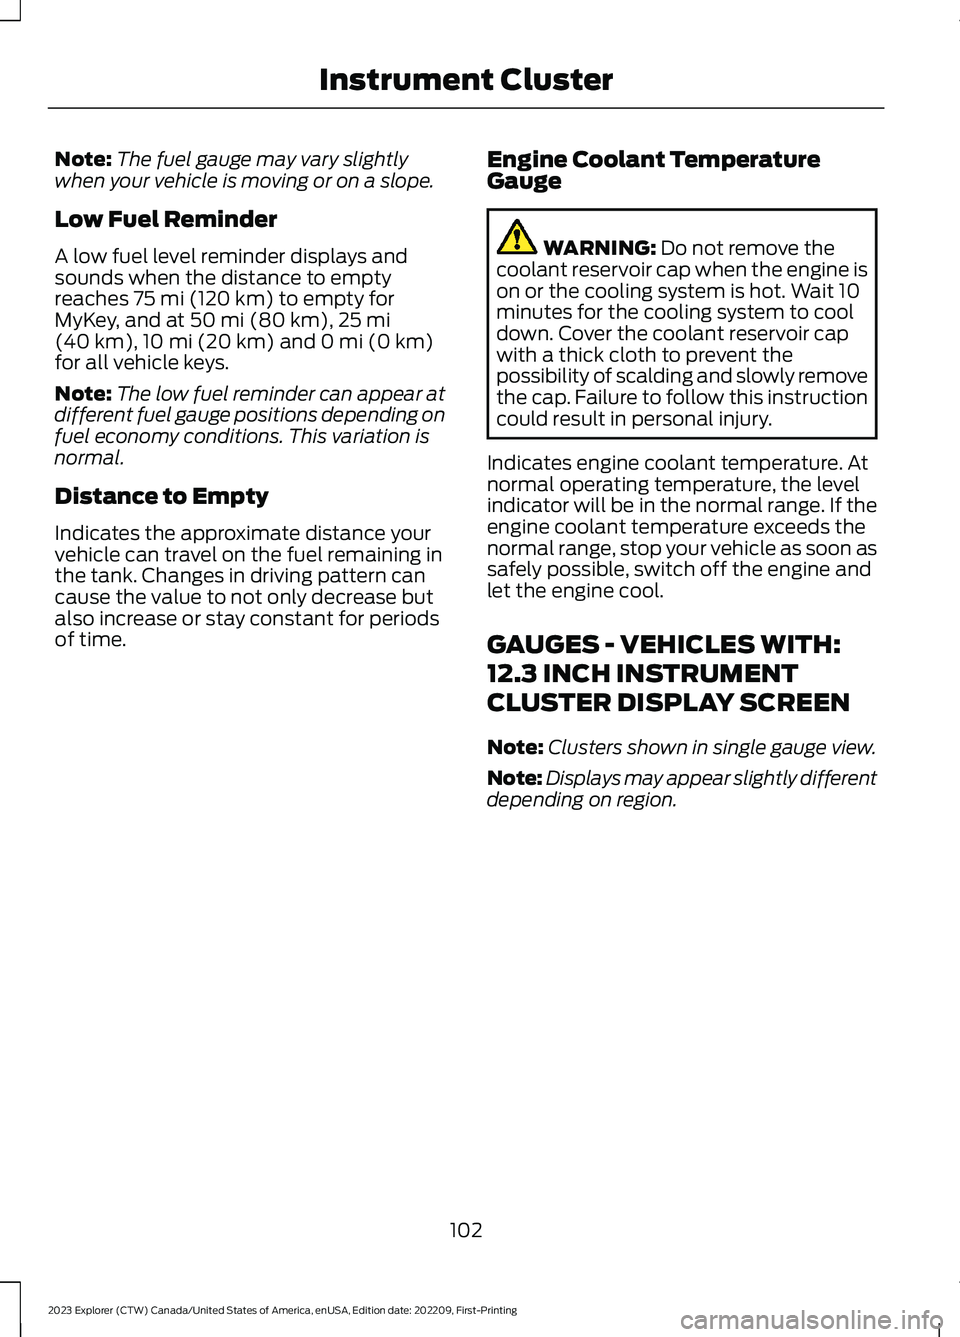 FORD EXPLORER 2023  Owners Manual Note:The fuel gauge may vary slightlywhen your vehicle is moving or on a slope.
Low Fuel Reminder
A low fuel level reminder displays andsounds when the distance to emptyreaches 75 mi (120 km) to empty